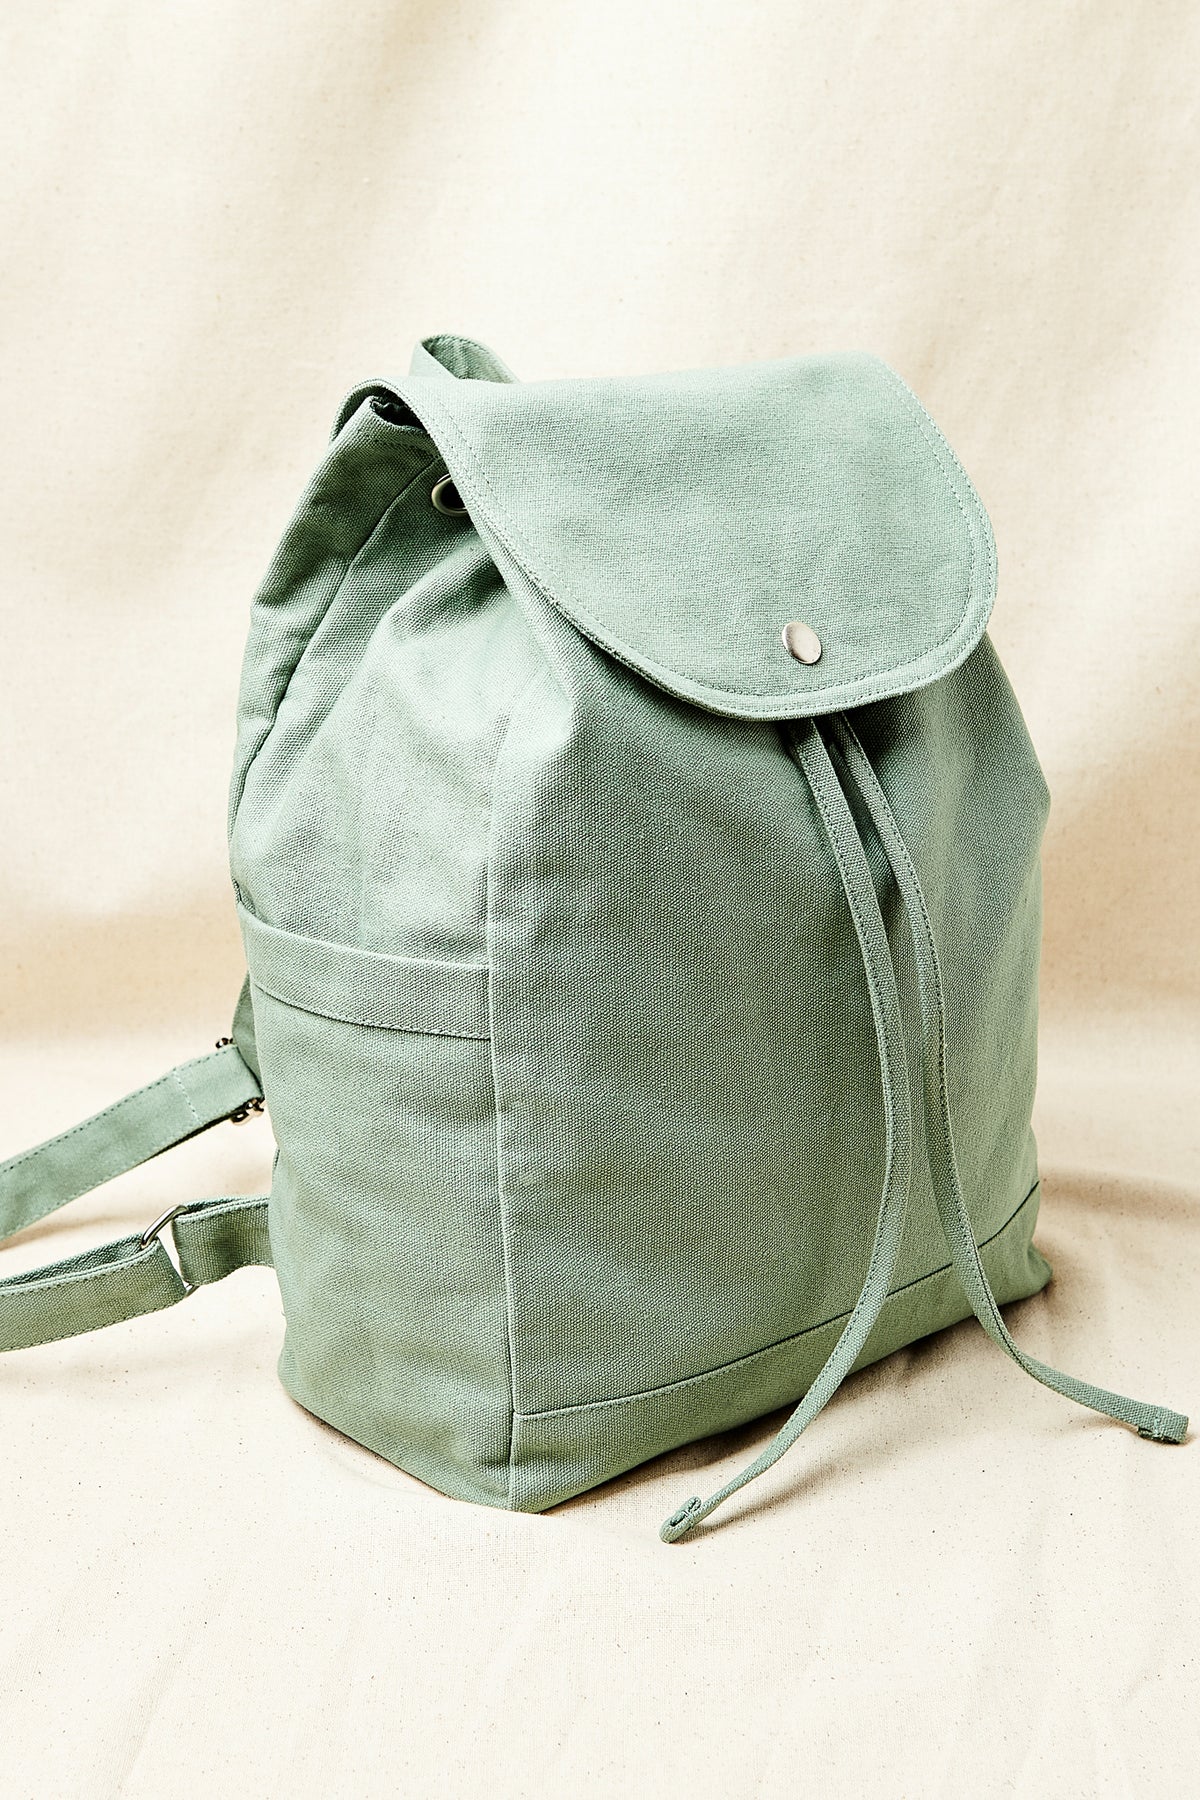 Palm + Perkins Canvas Backpack